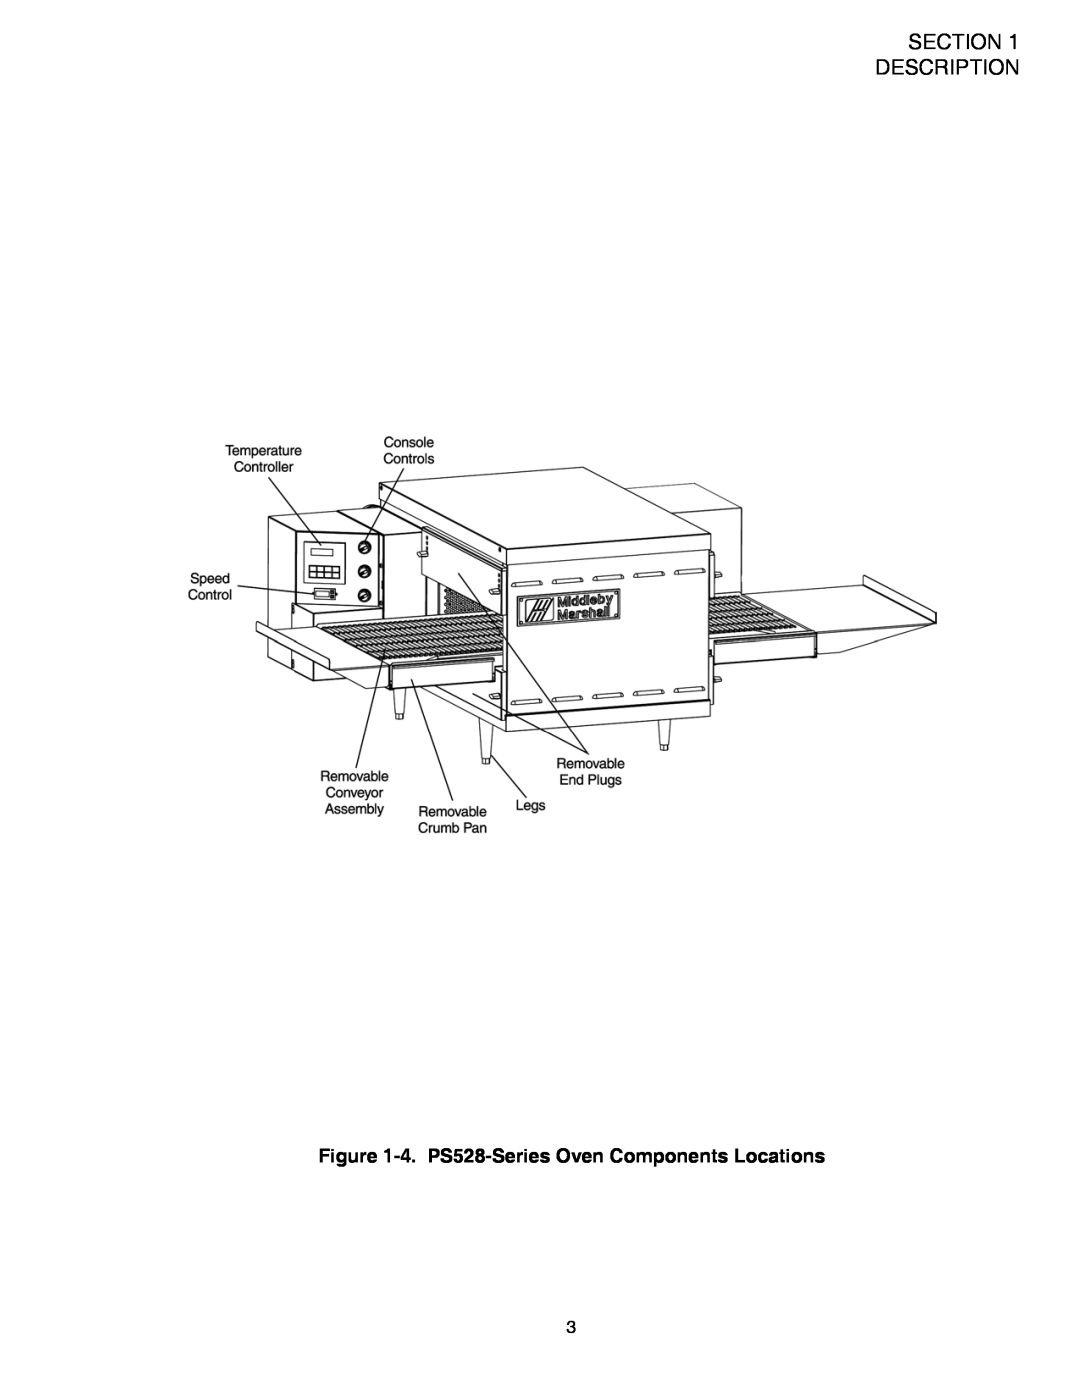 Middleby Marshall PS528 (Double), PS528E, PS528 (Triple) Section Description, 4. PS528-Series Oven Components Locations 